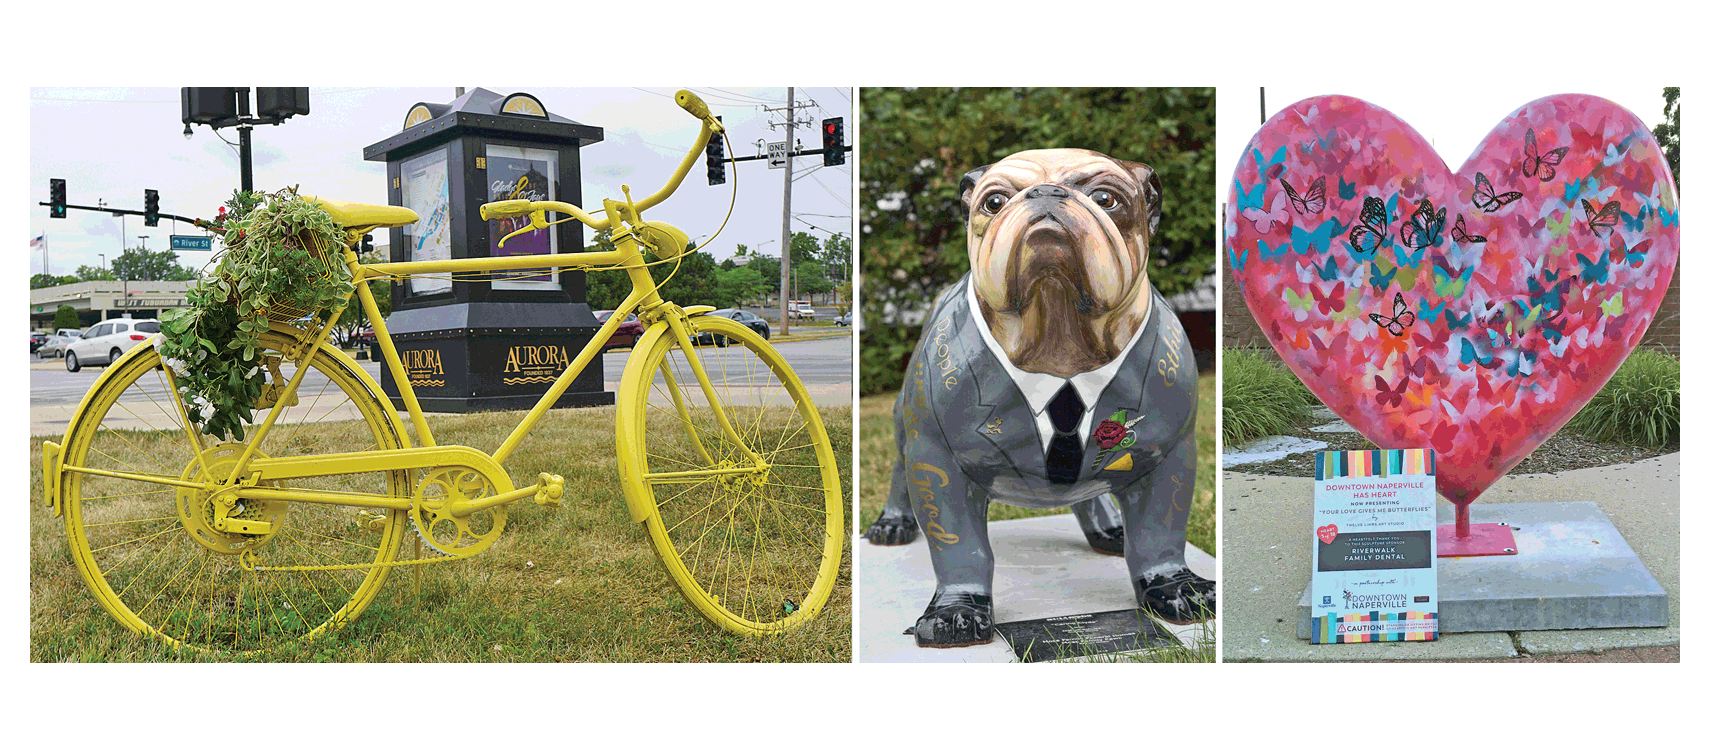 Downtown public art creates serenity, controversy, in Aurora Bikes in Bloom, left; Naperville Has Heart, lower left; and Batavia Bulldogs Unleashed, lower right.